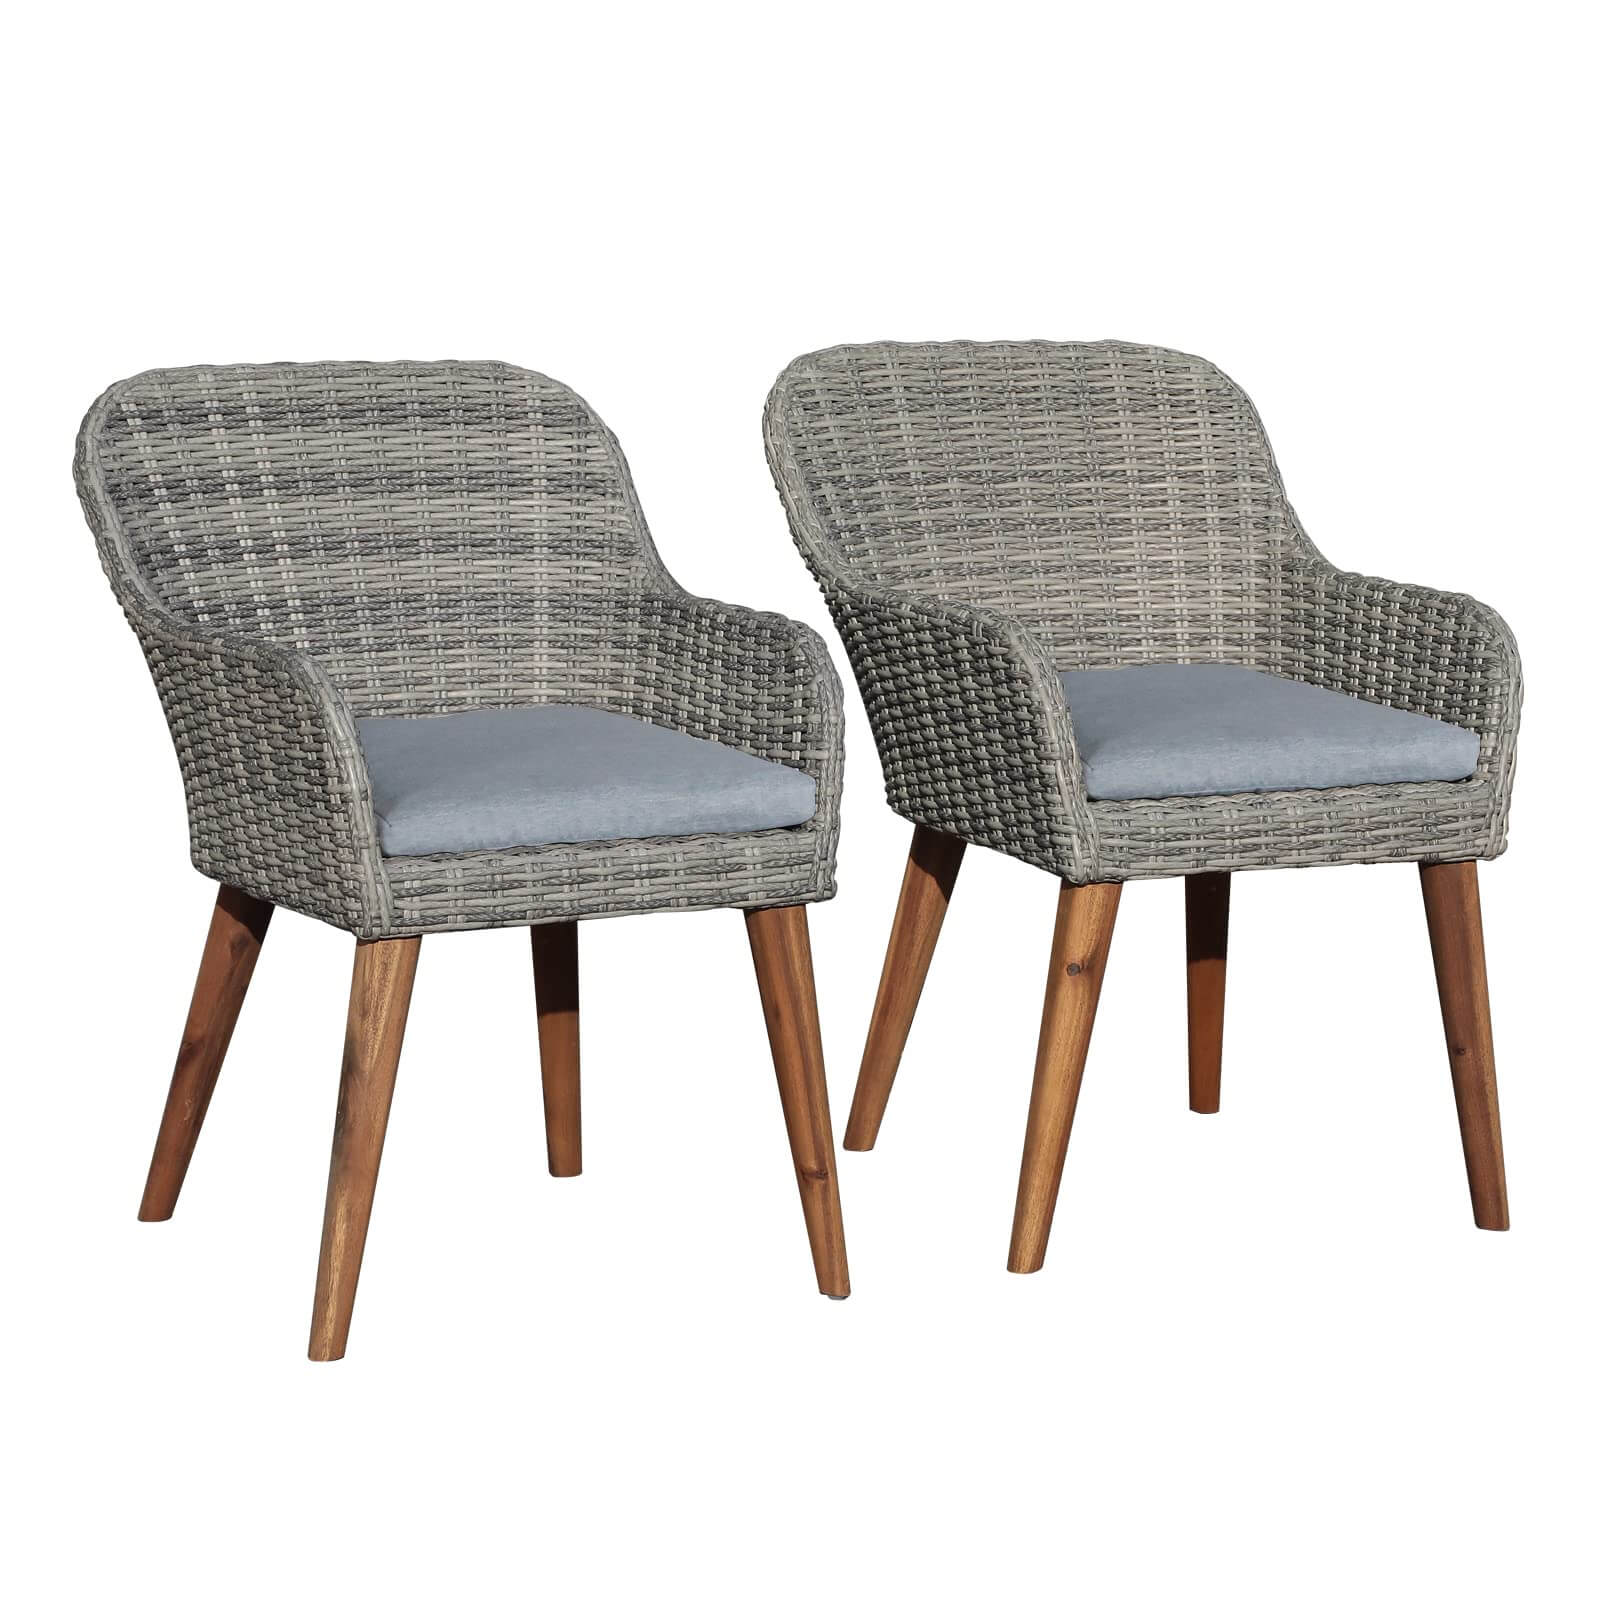 Patio Dining Chairs Set of 2 with Wood Legs, Outdoor Rattan Wicker Chairs with Seat Cushions